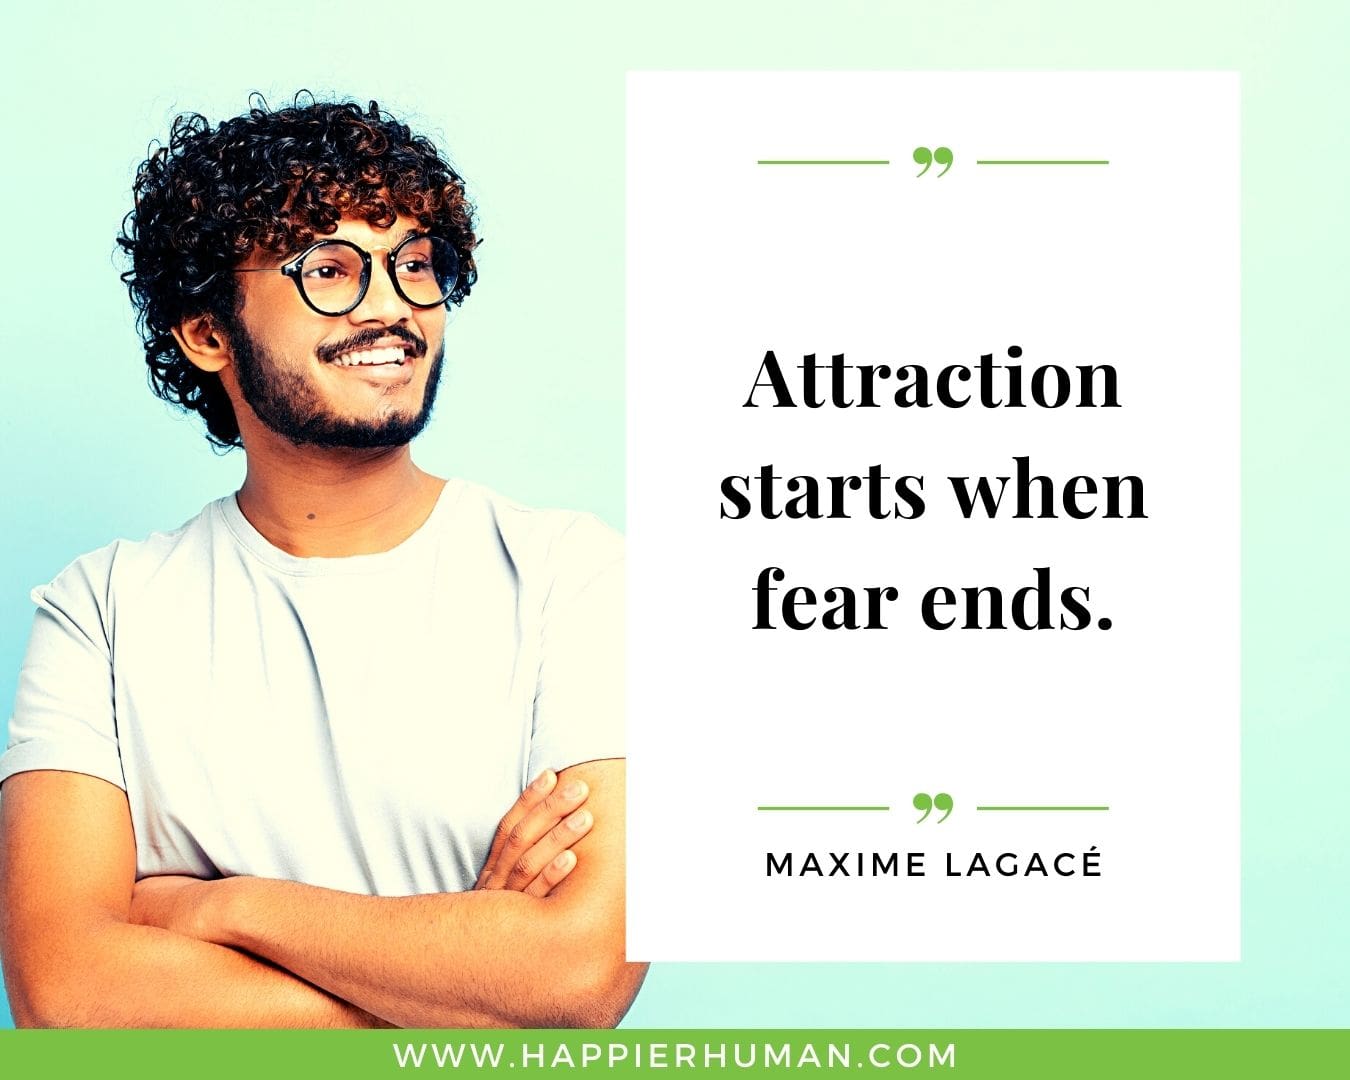 Positive Energy Quotes - “Attraction starts when fear ends.” - Maxime Lagacé